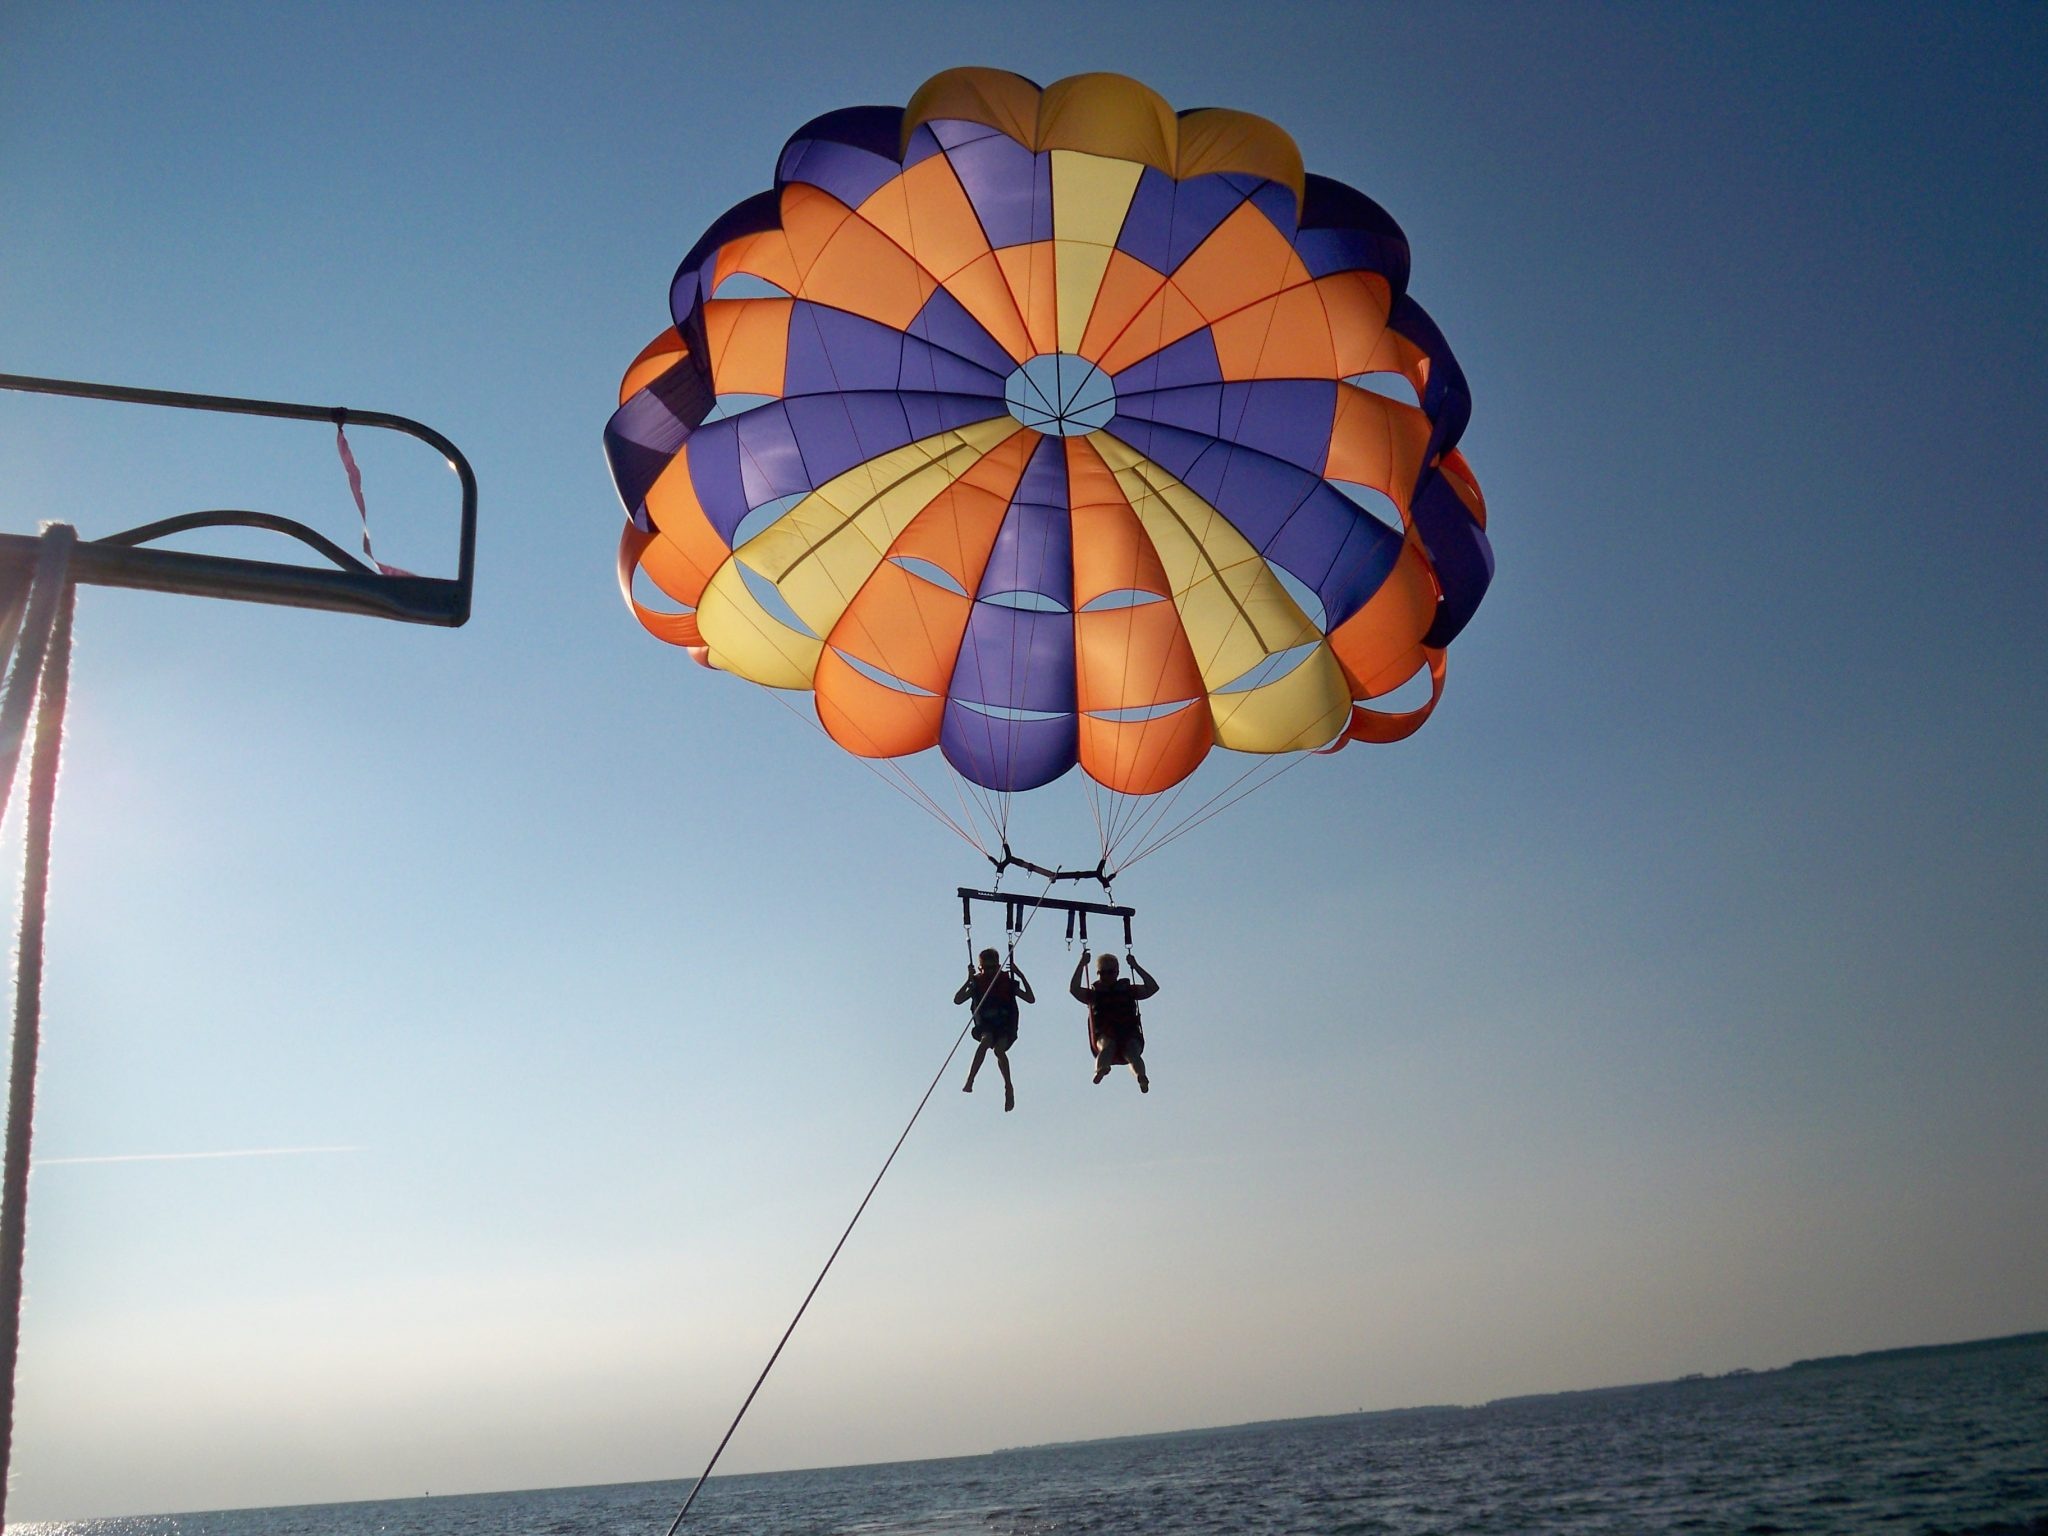 Parasailing: Flying in tandem, Winch Direct Parasailing system, The parachute flight, Winchboats. 2050x1540 HD Wallpaper.